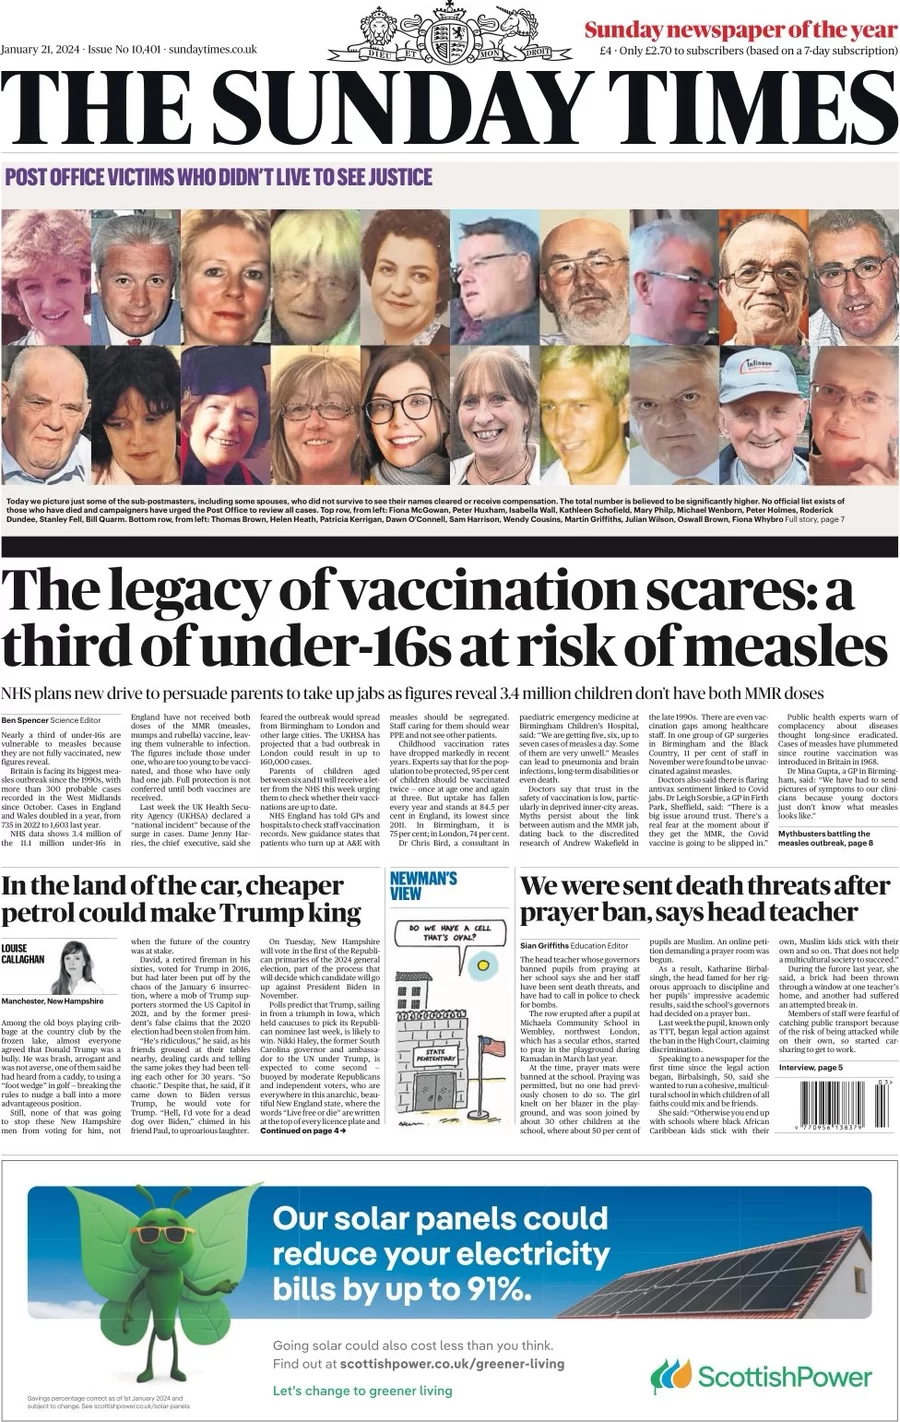 The Sunday Times – the legacy of vaccination scares: a third of under-16s at risk of measles